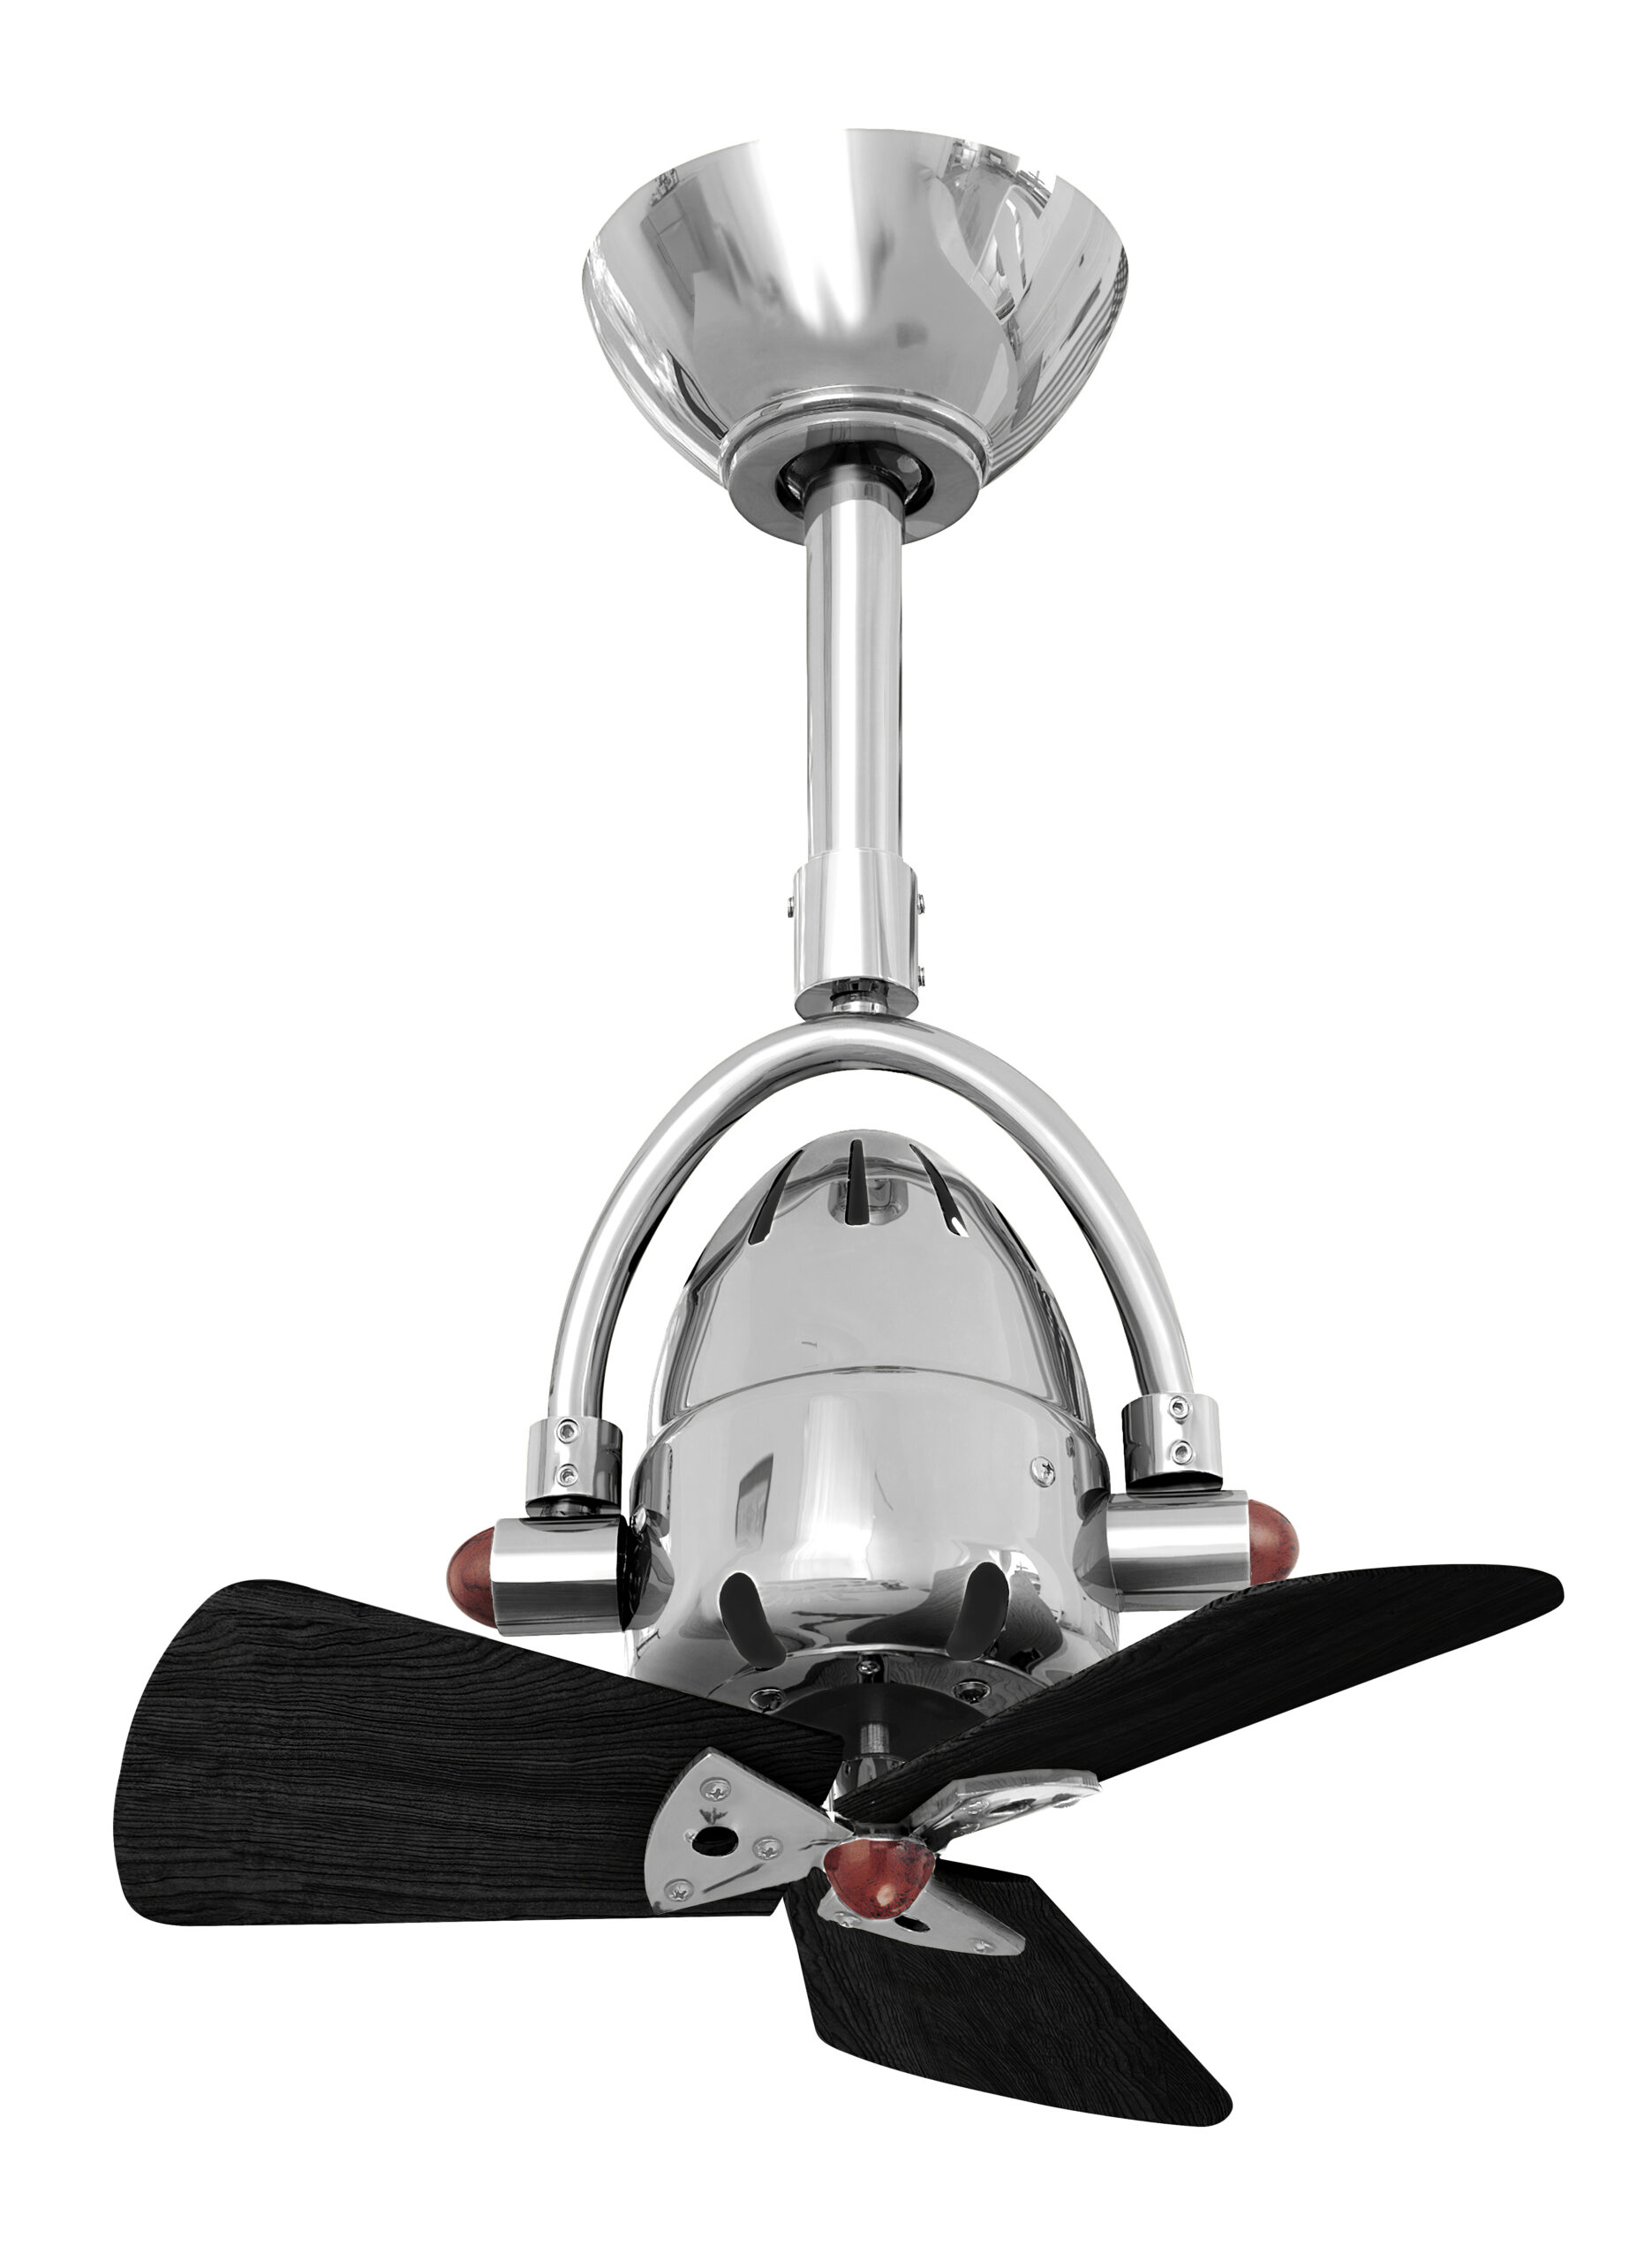 Diane ceiling fan in Polished Chrome with Matte Black wood blade